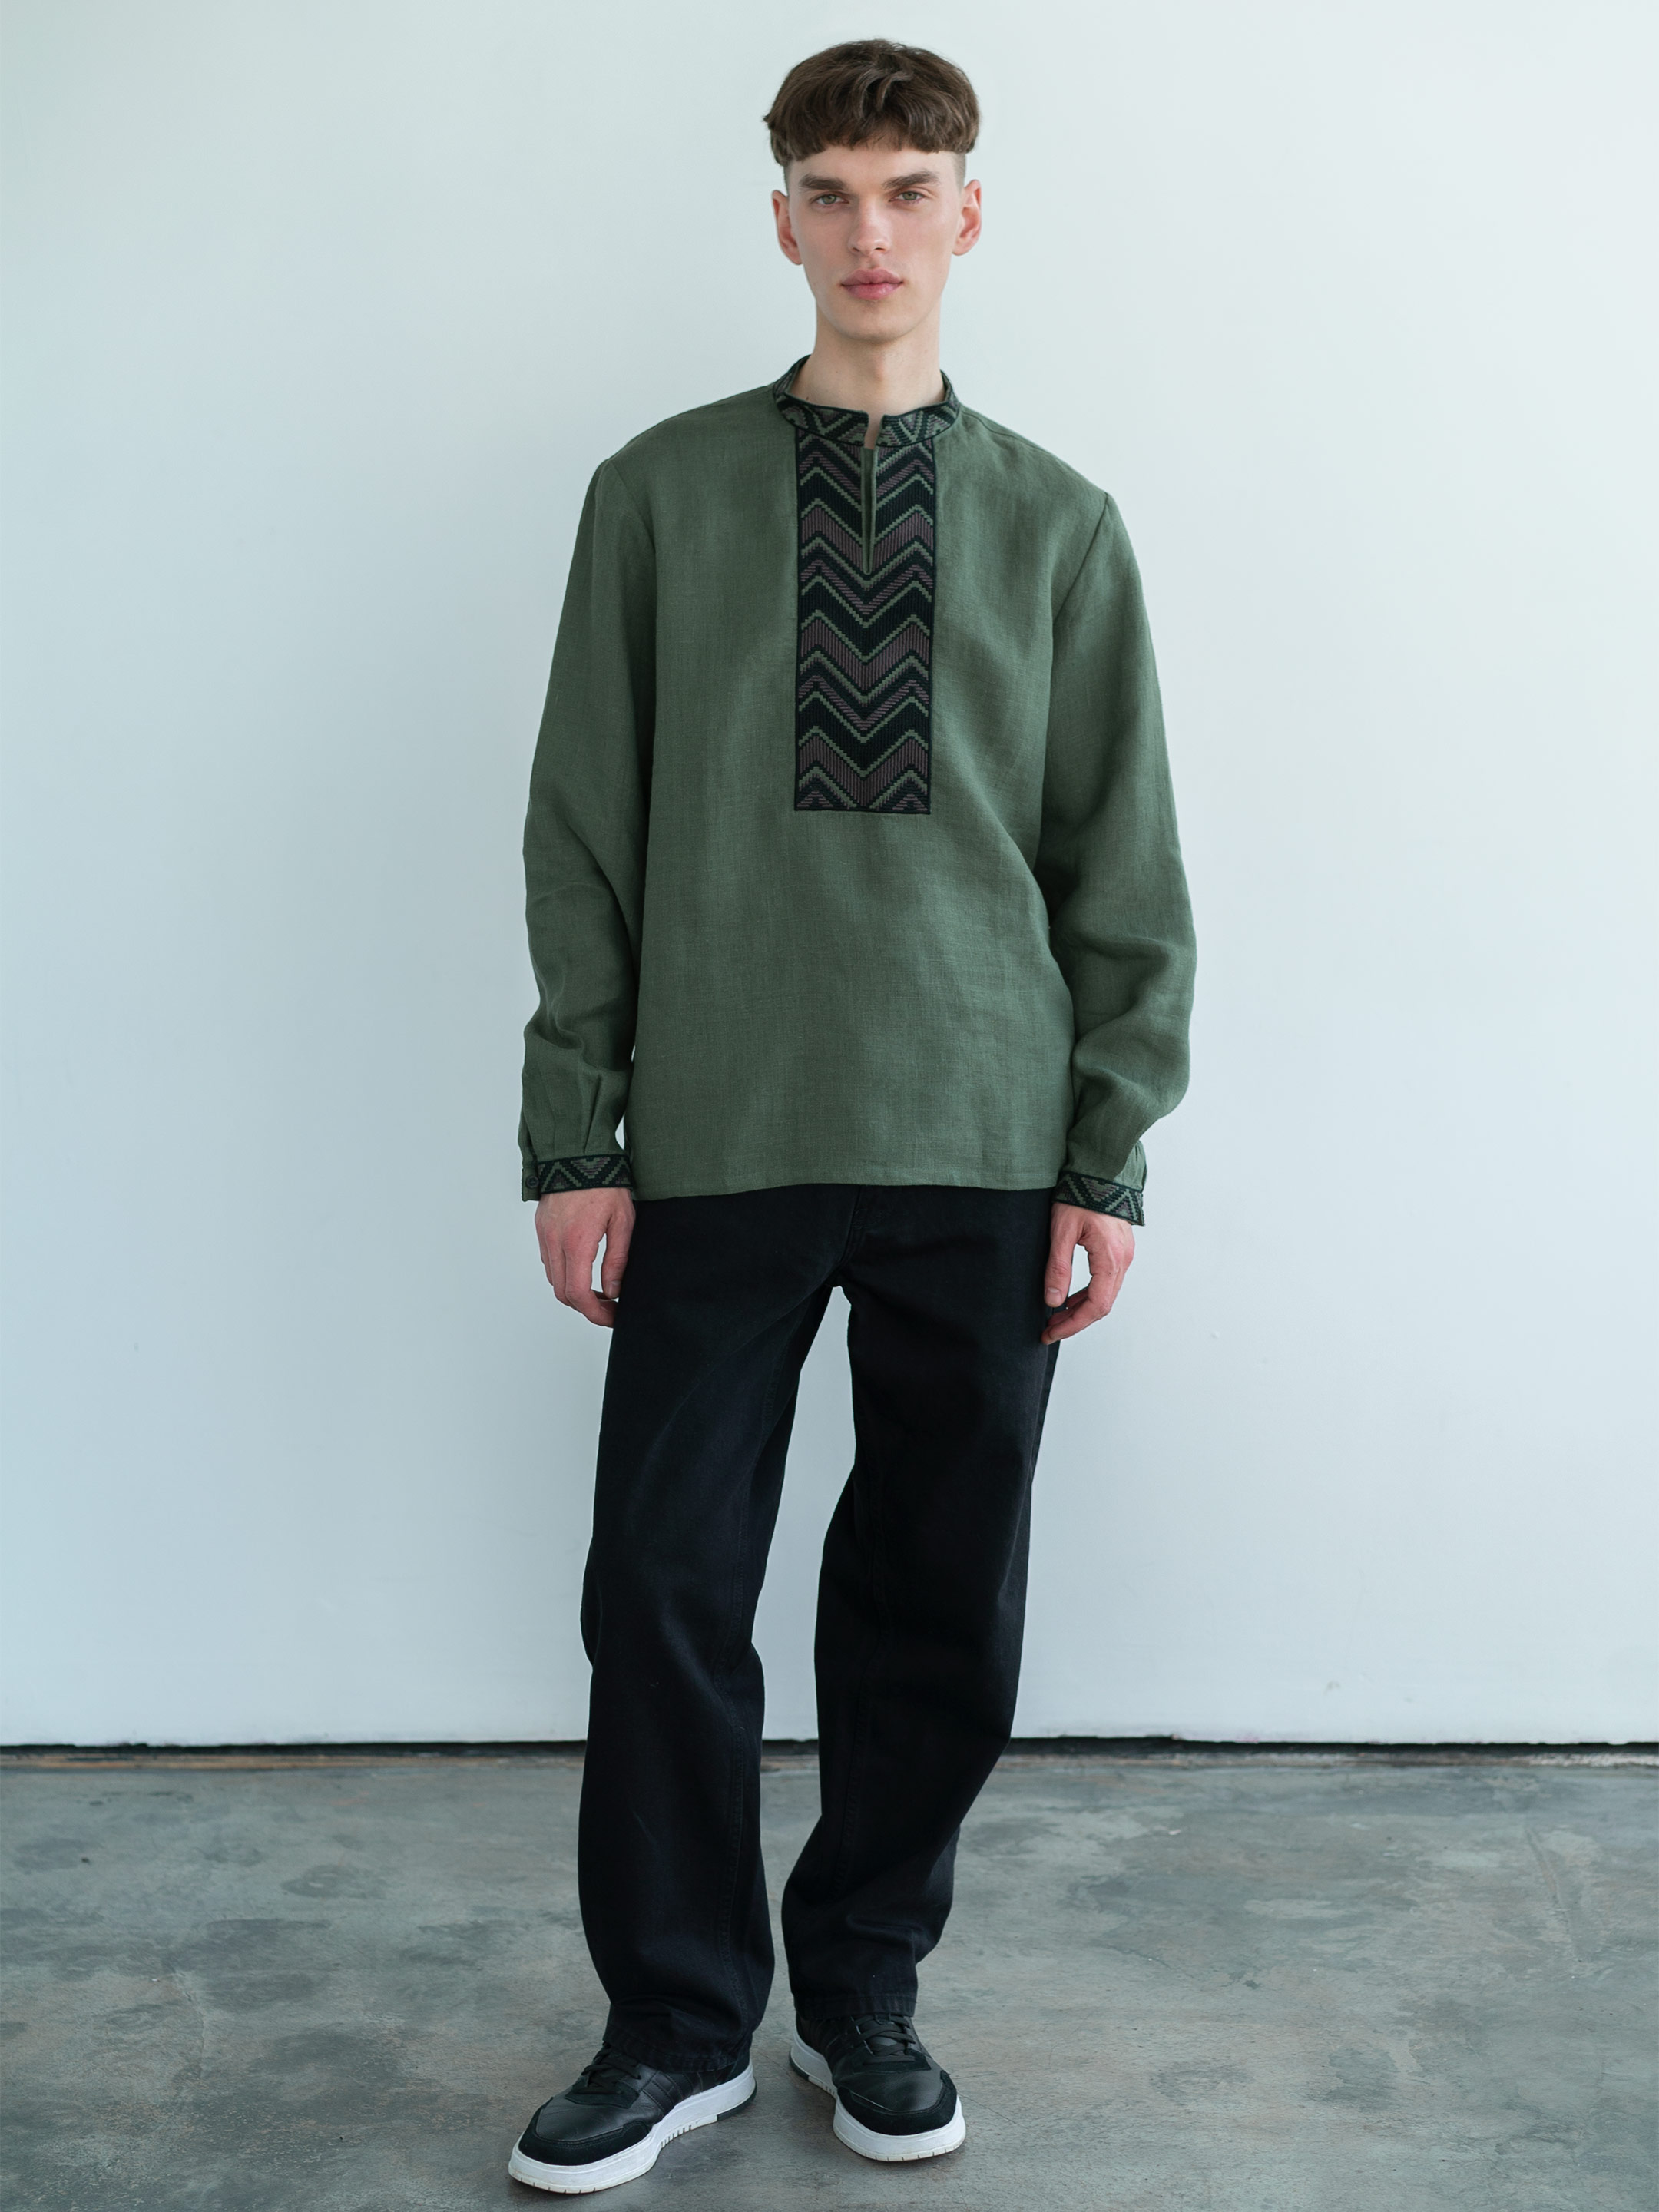 Embroidered shirt made in dark-green color ED8 - photo 2